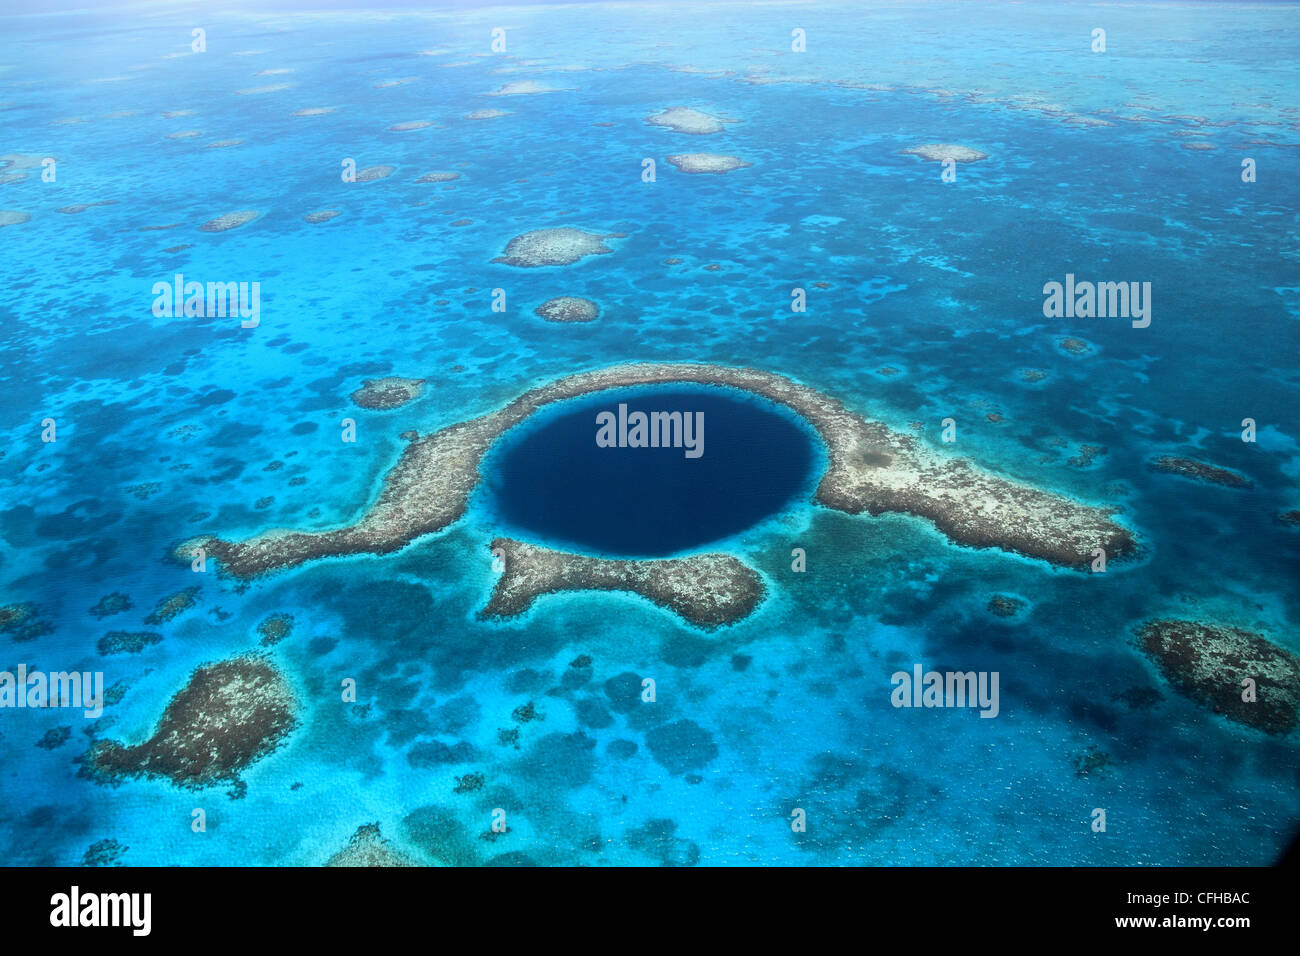 Great Blue Hole, a collapsed underwater cave system, Lighthouse Reef, Mesoamerican Barrier Reef, Belize, Caribbean, Central America Stock Photo